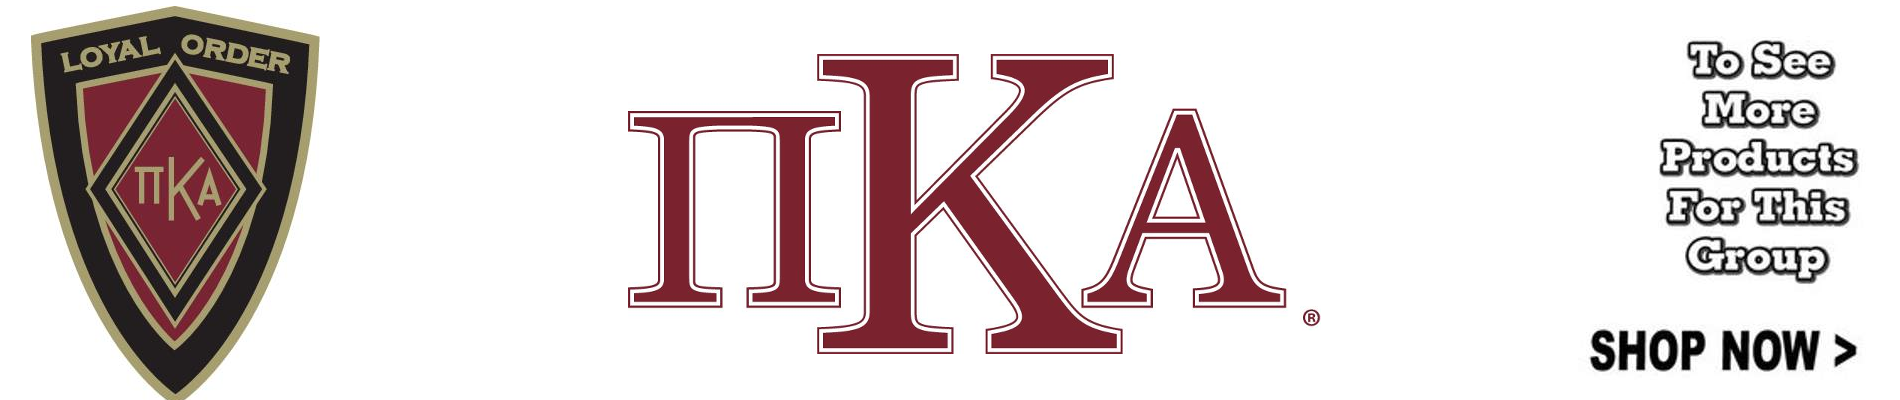 Shop now to see all of our Pi Kappa Alpha merchandise